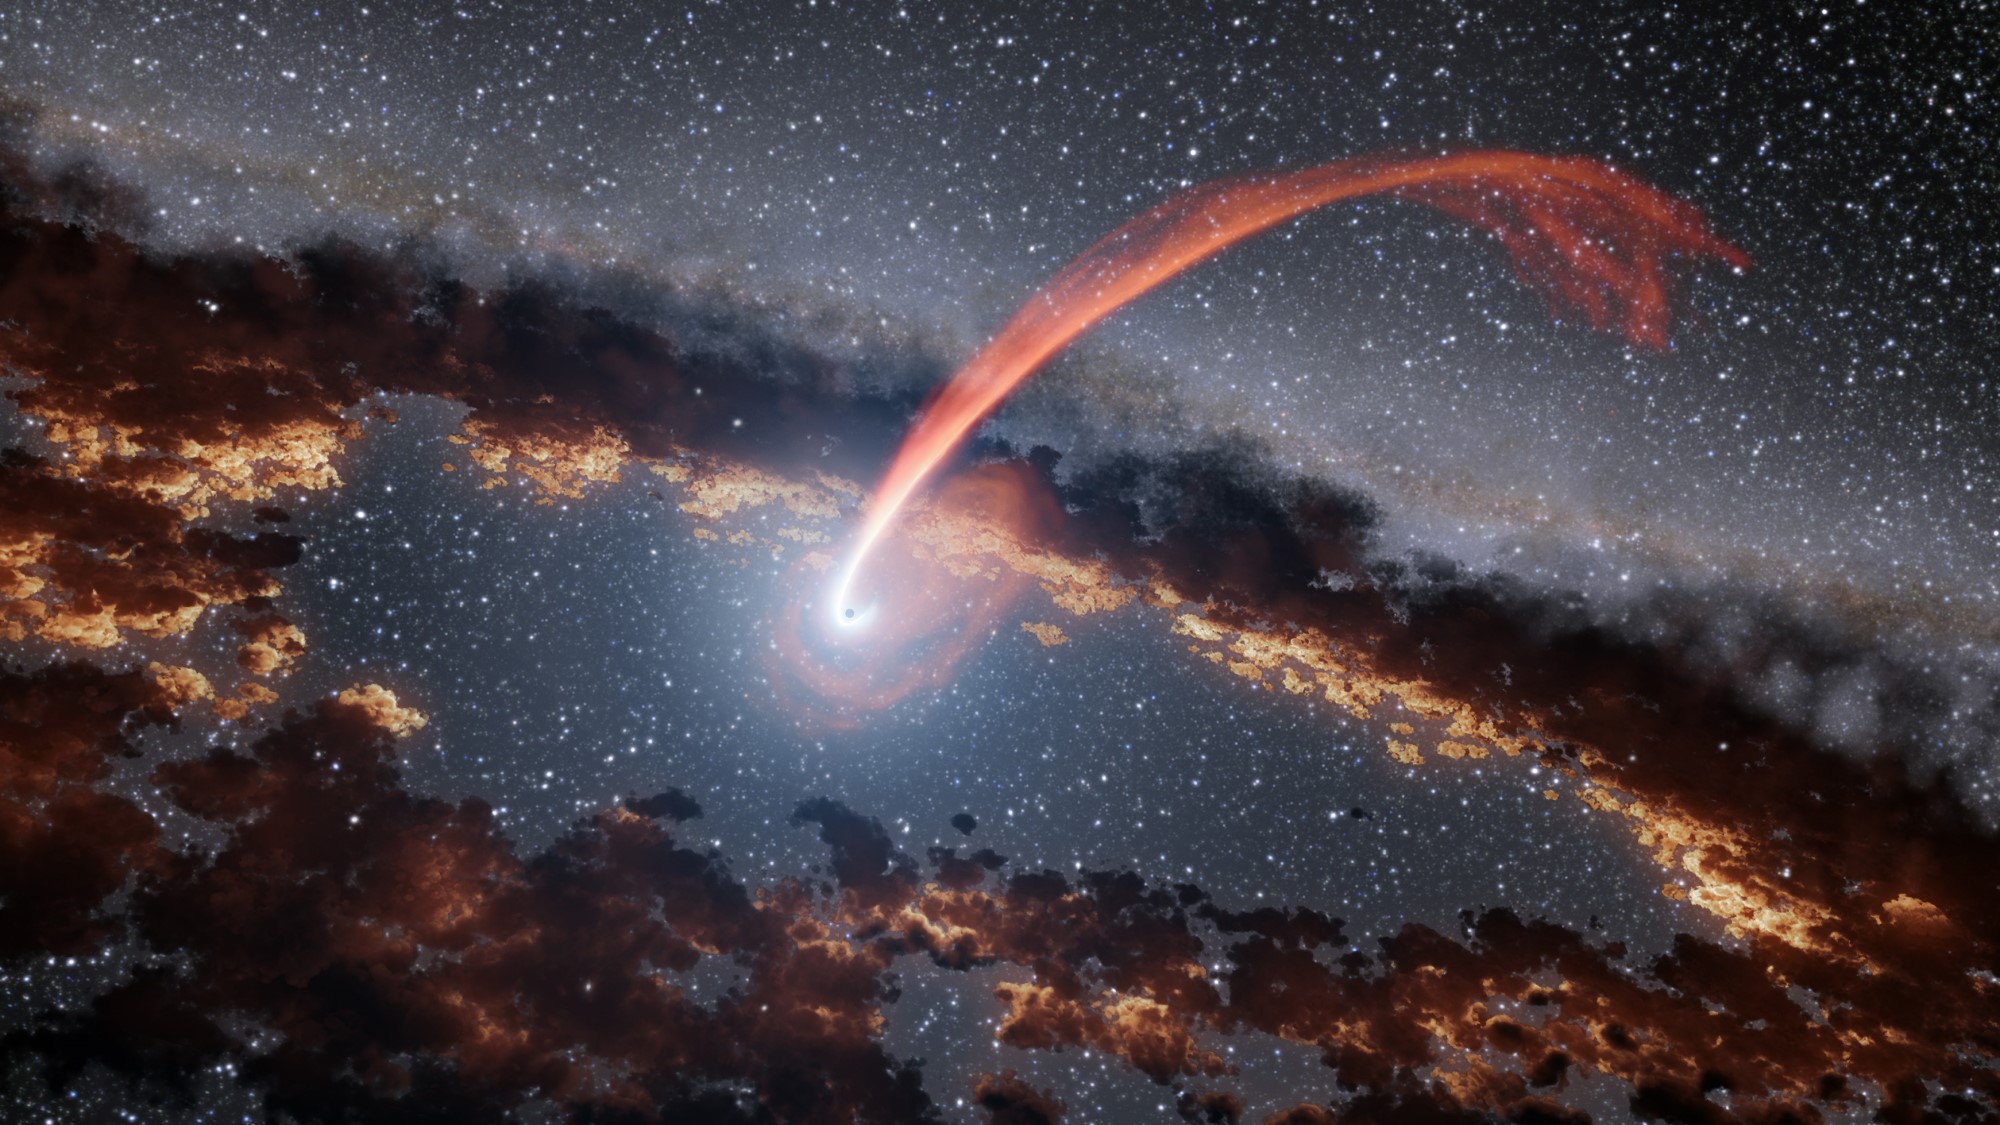 Artist's depiction of a supermassive black hole devouring material from a star.